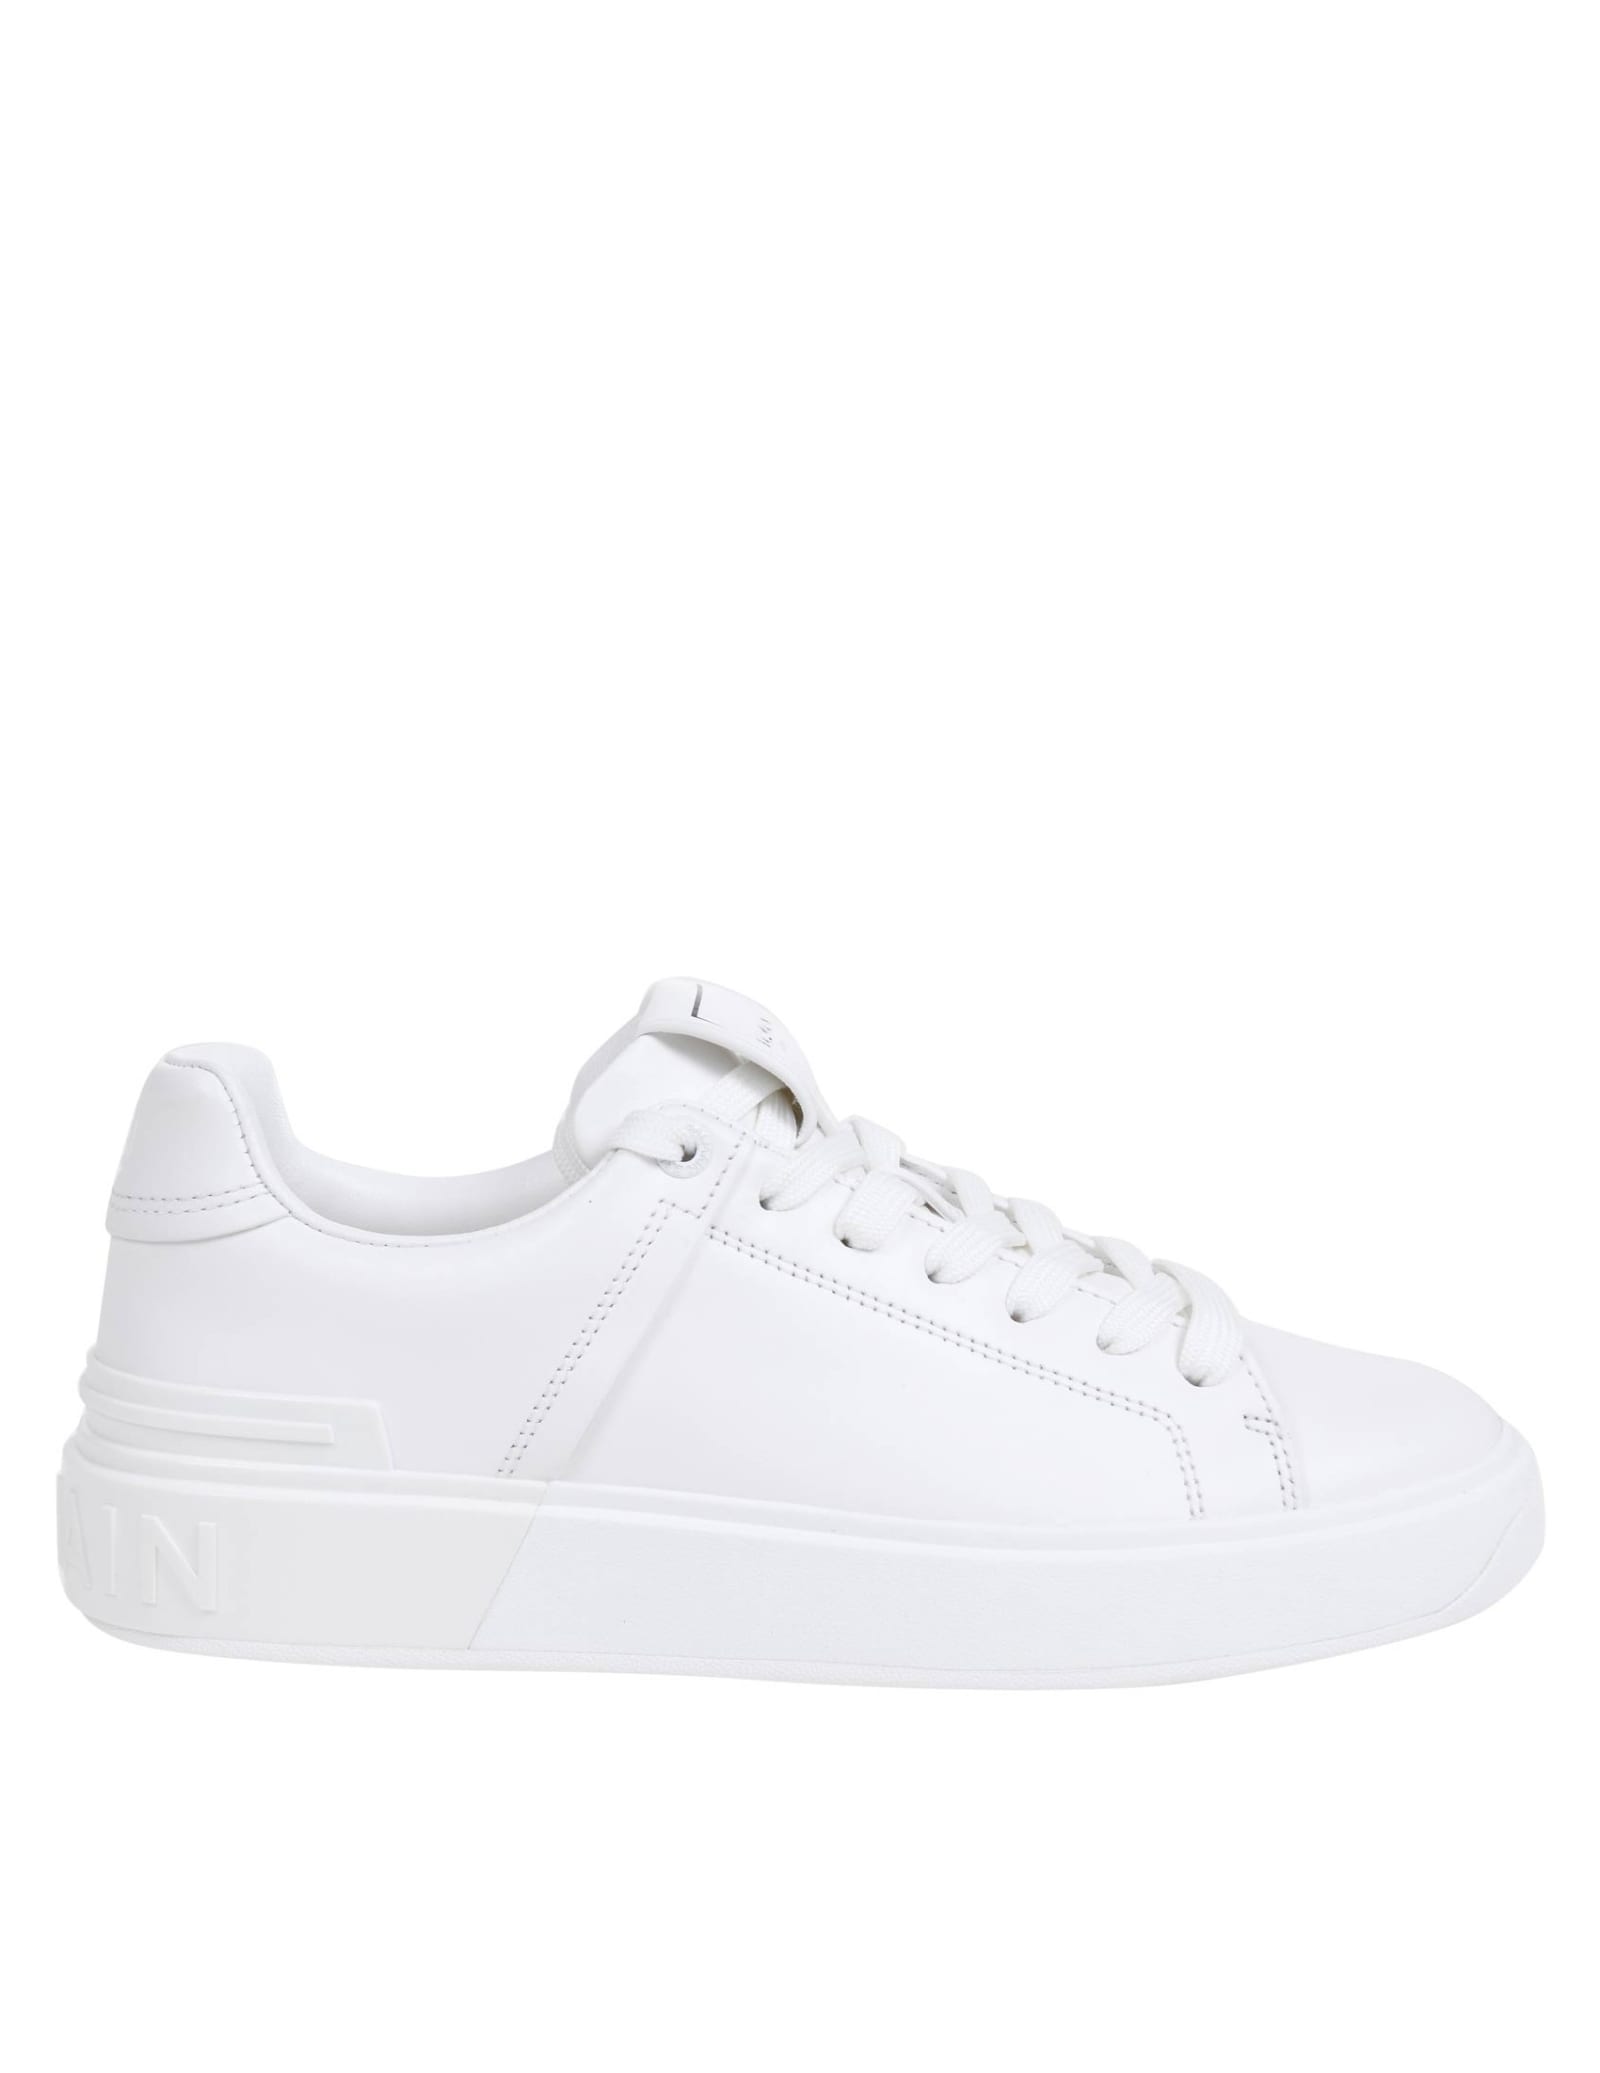 Balmain SNEAKERS B-COURT IN WHITE LEATHER